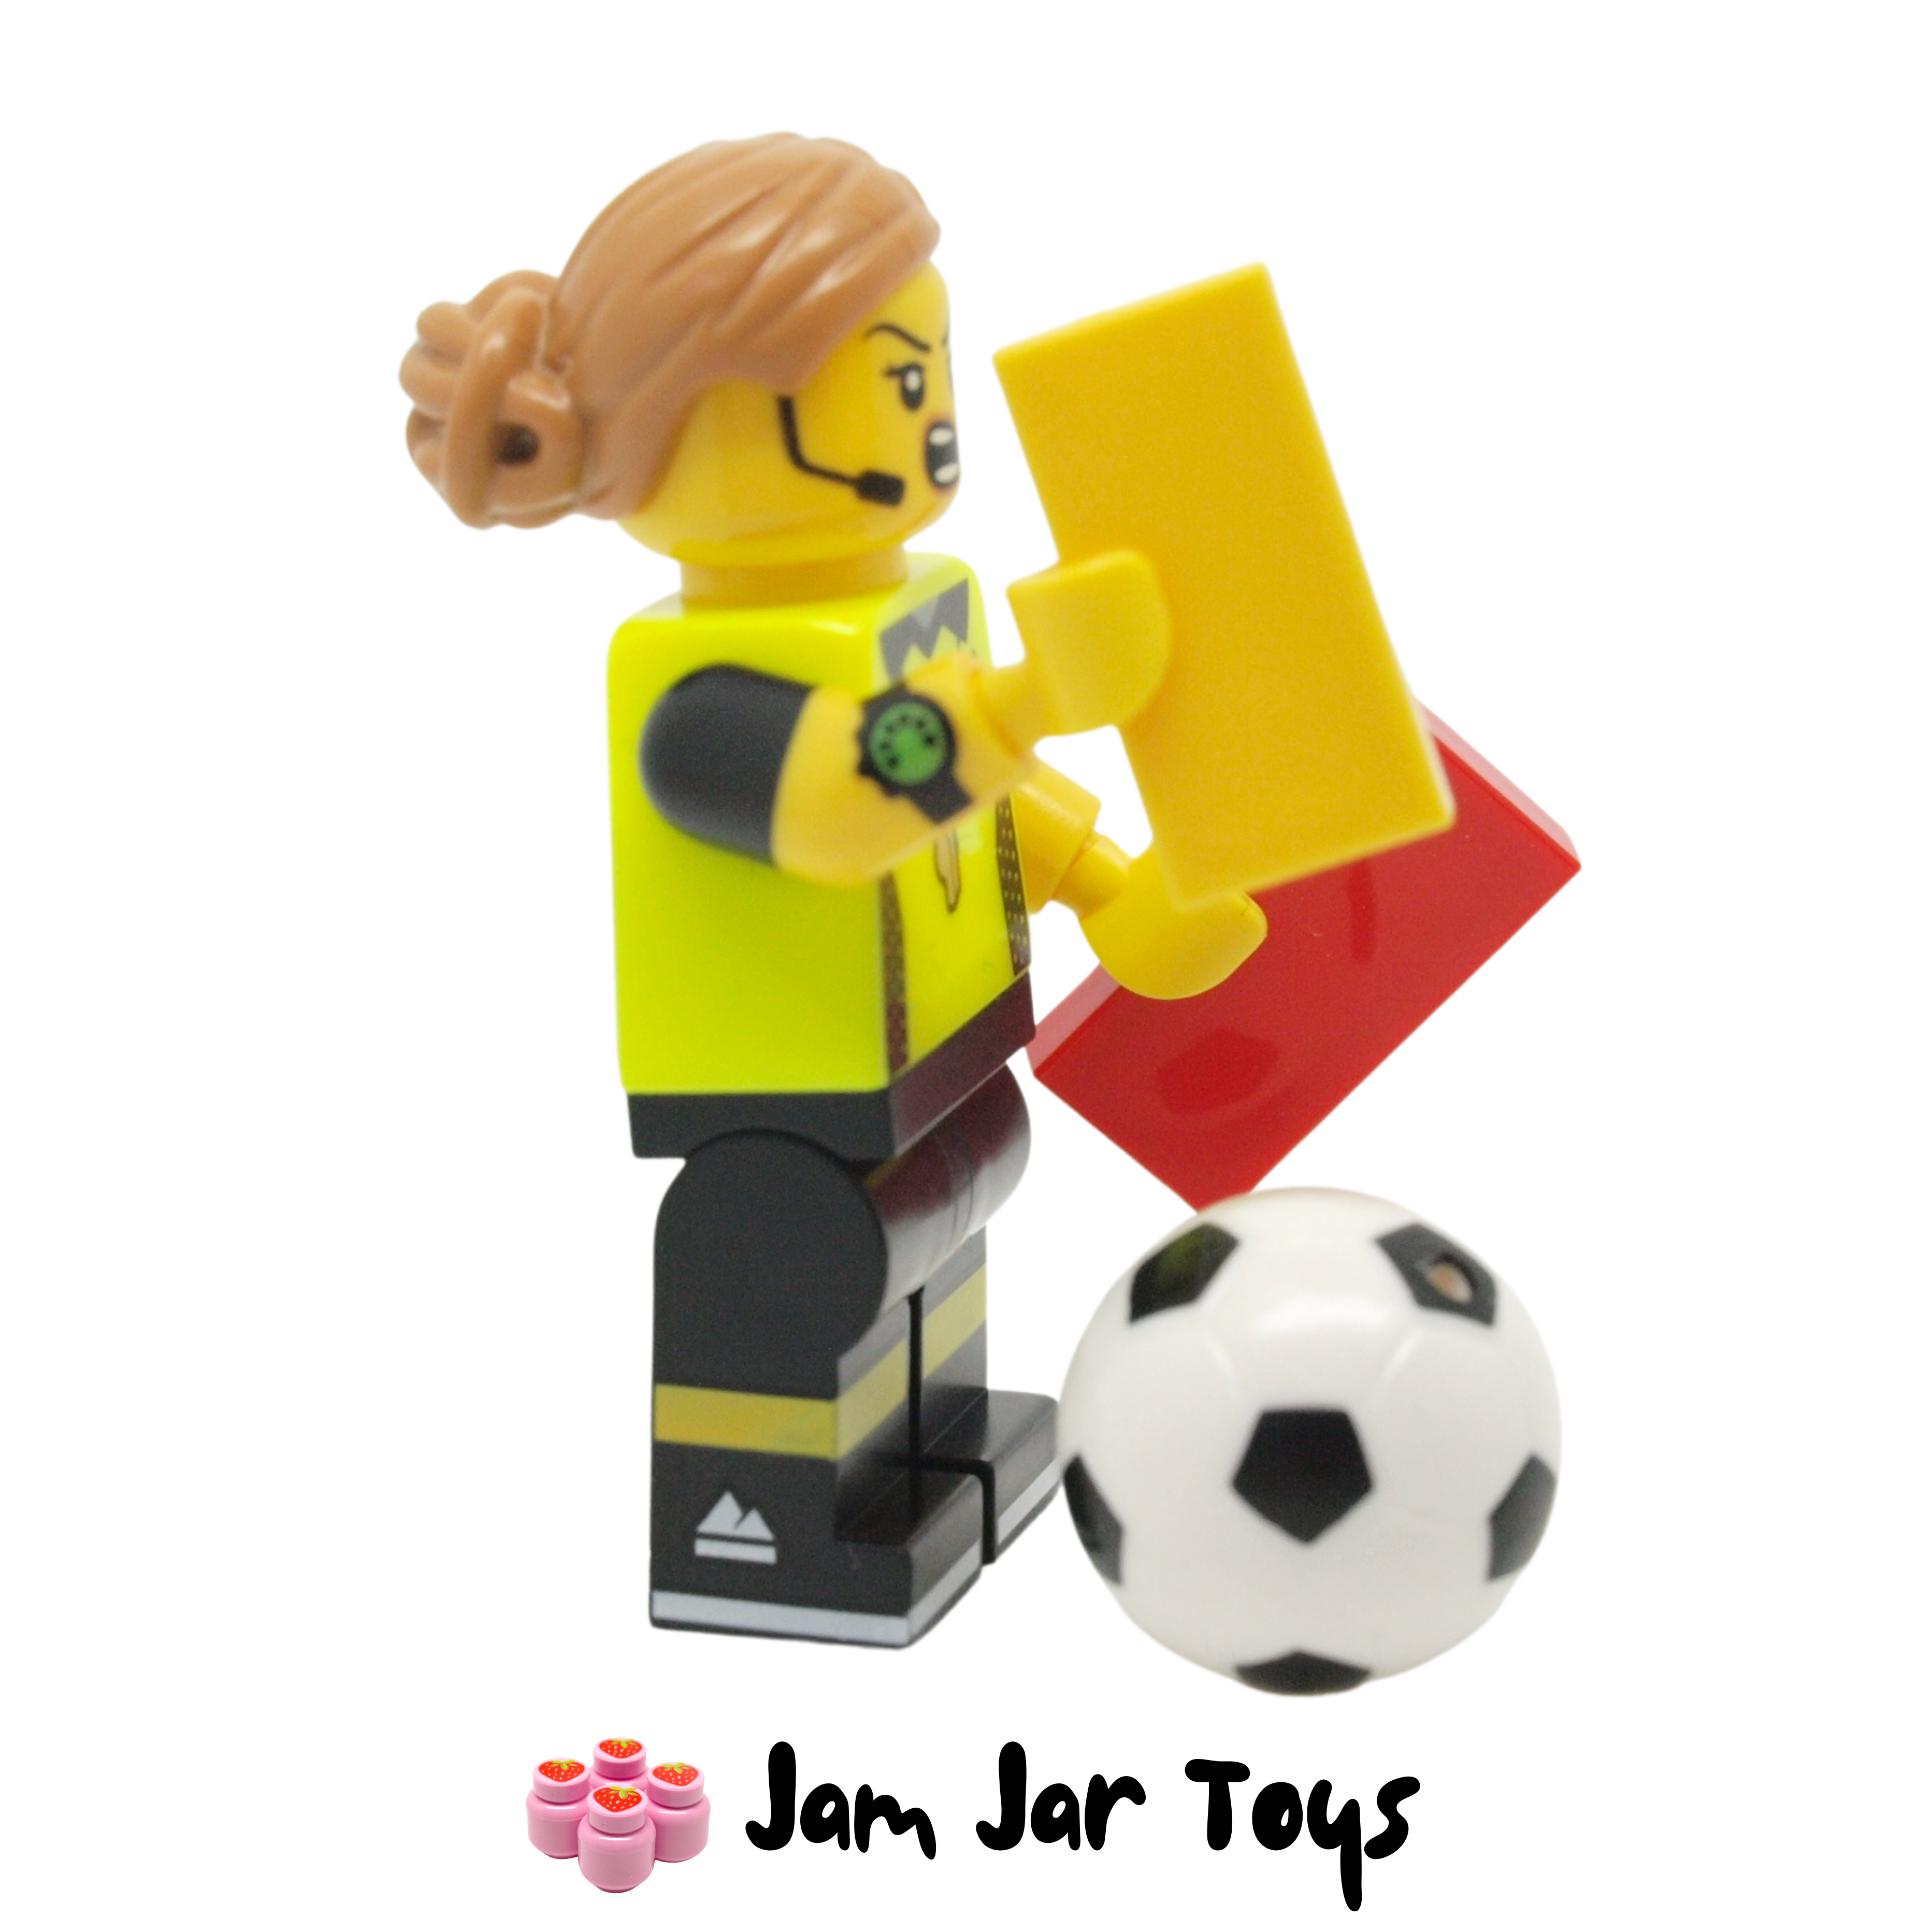 LEGO Football Referee Series 24 Collectable Minifigure - 71037-1